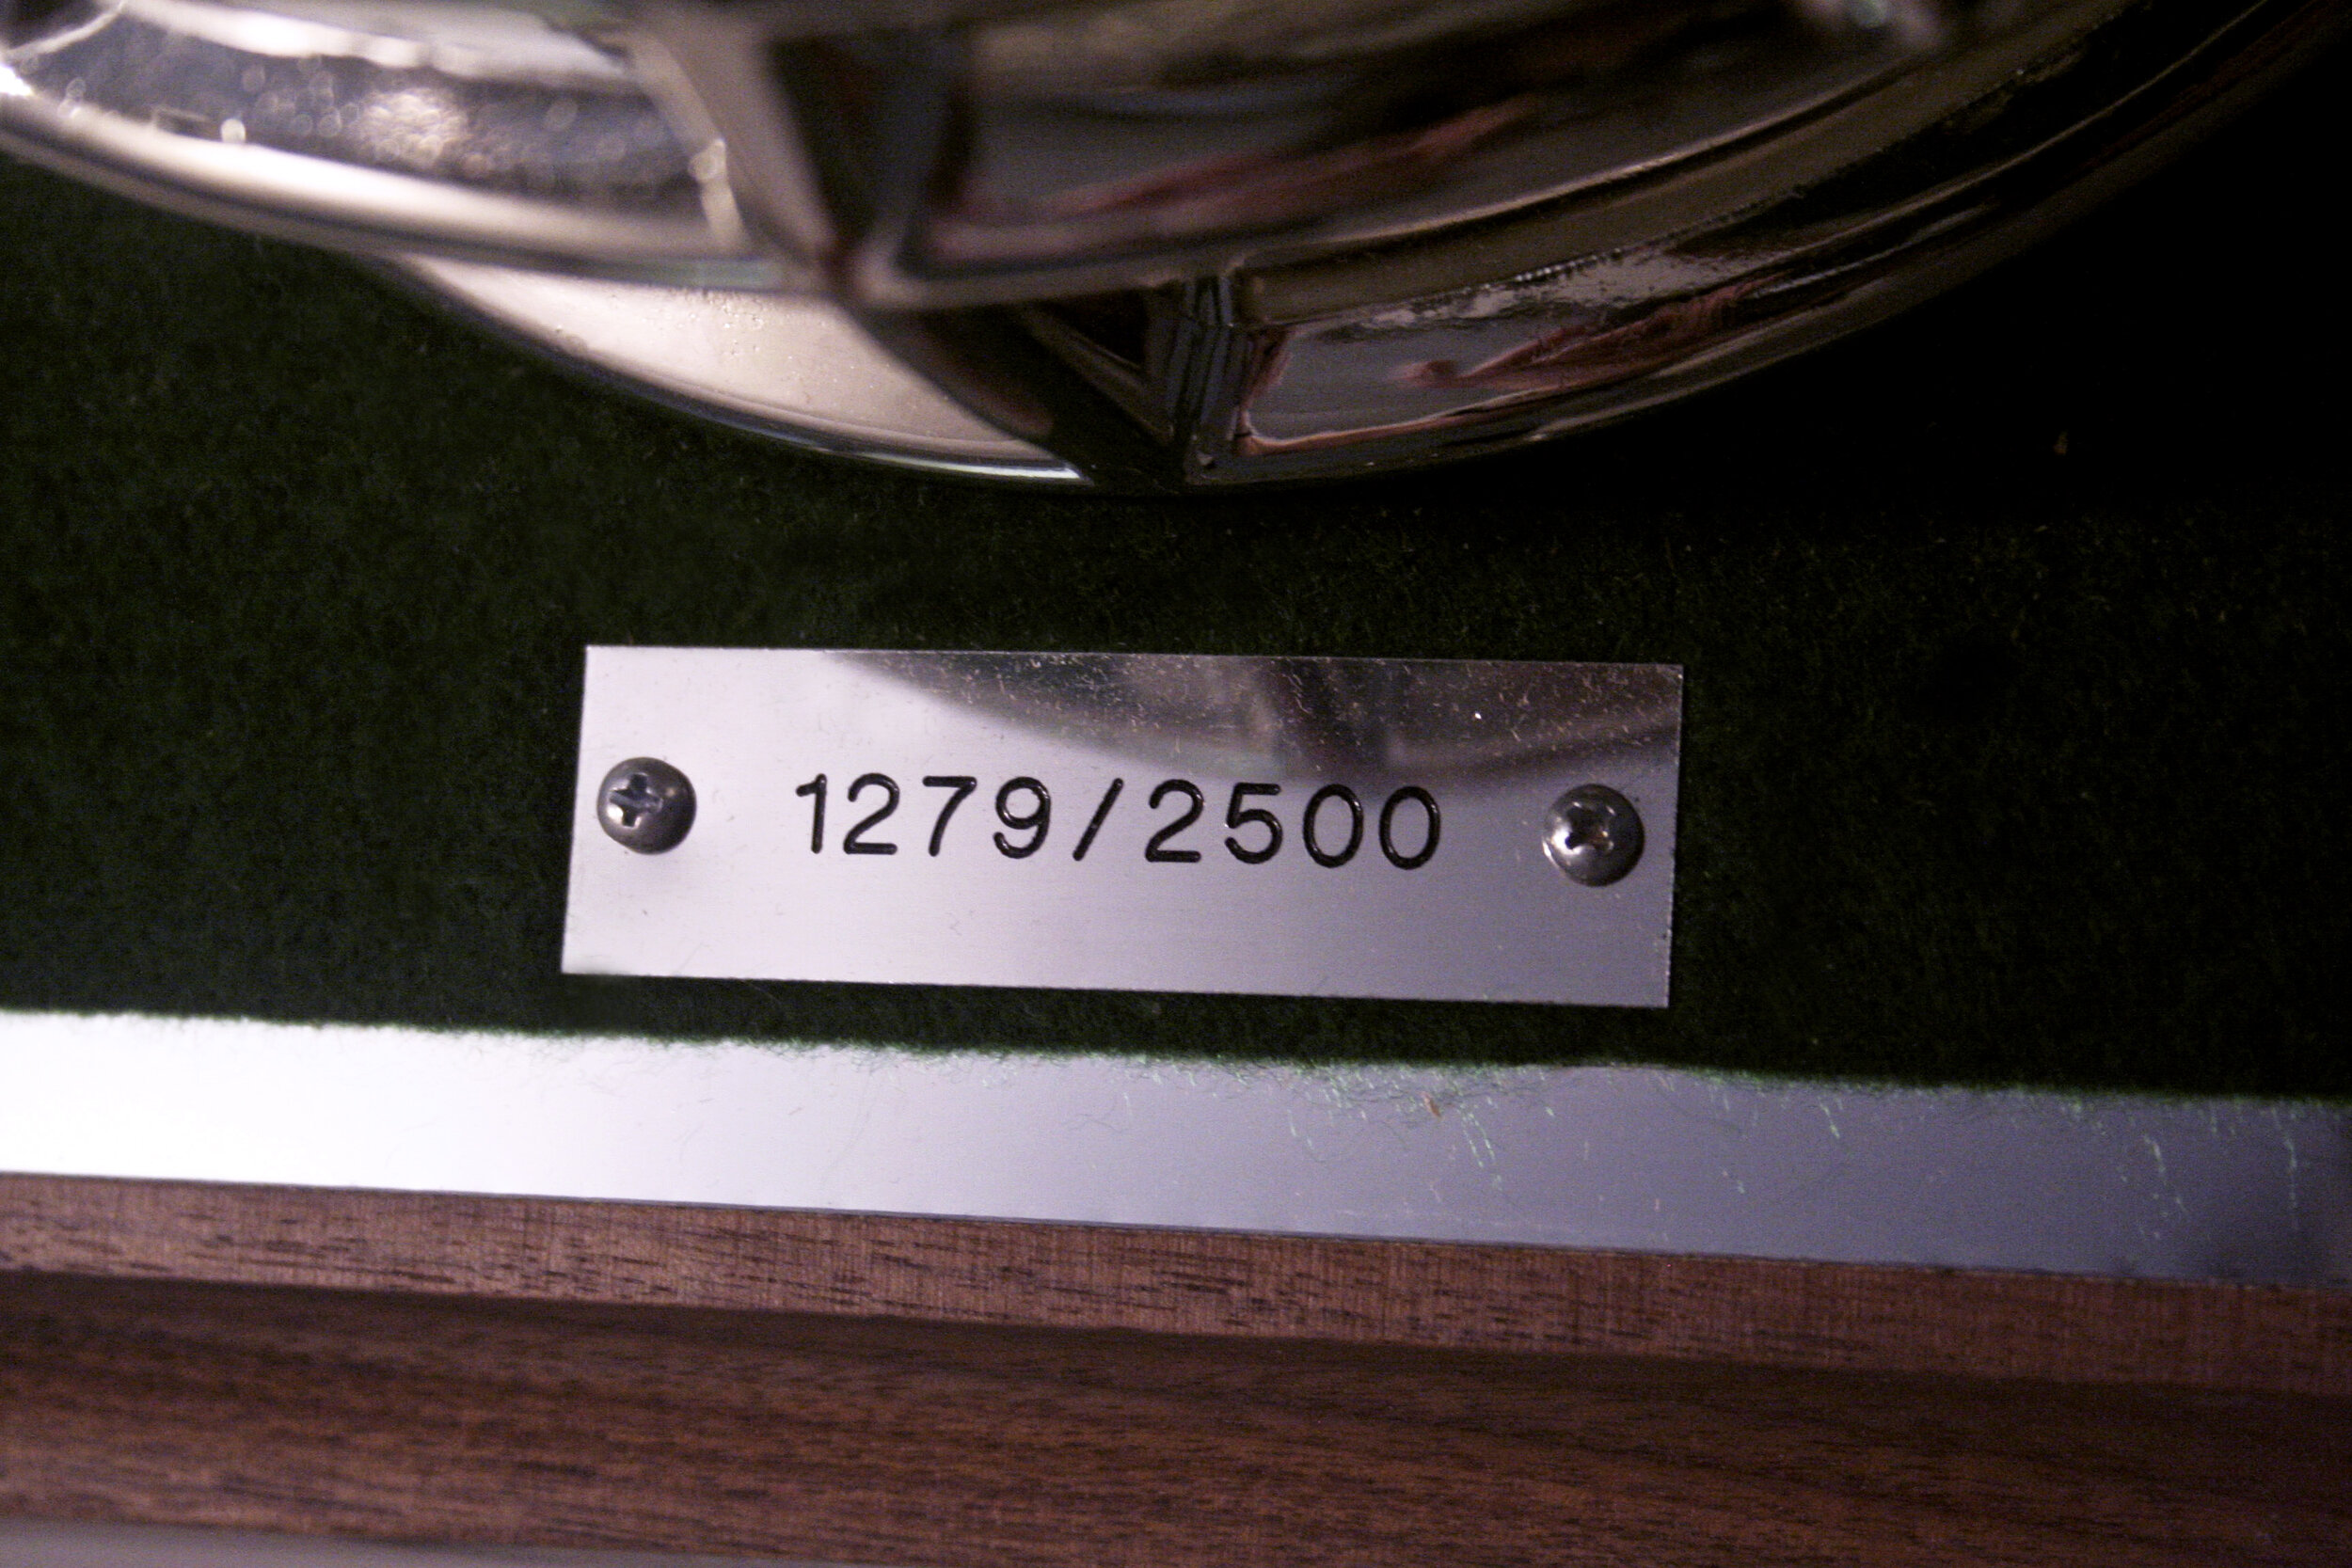   Production of the helmet was limited to 2500 pieces.  They’re all numbered…  